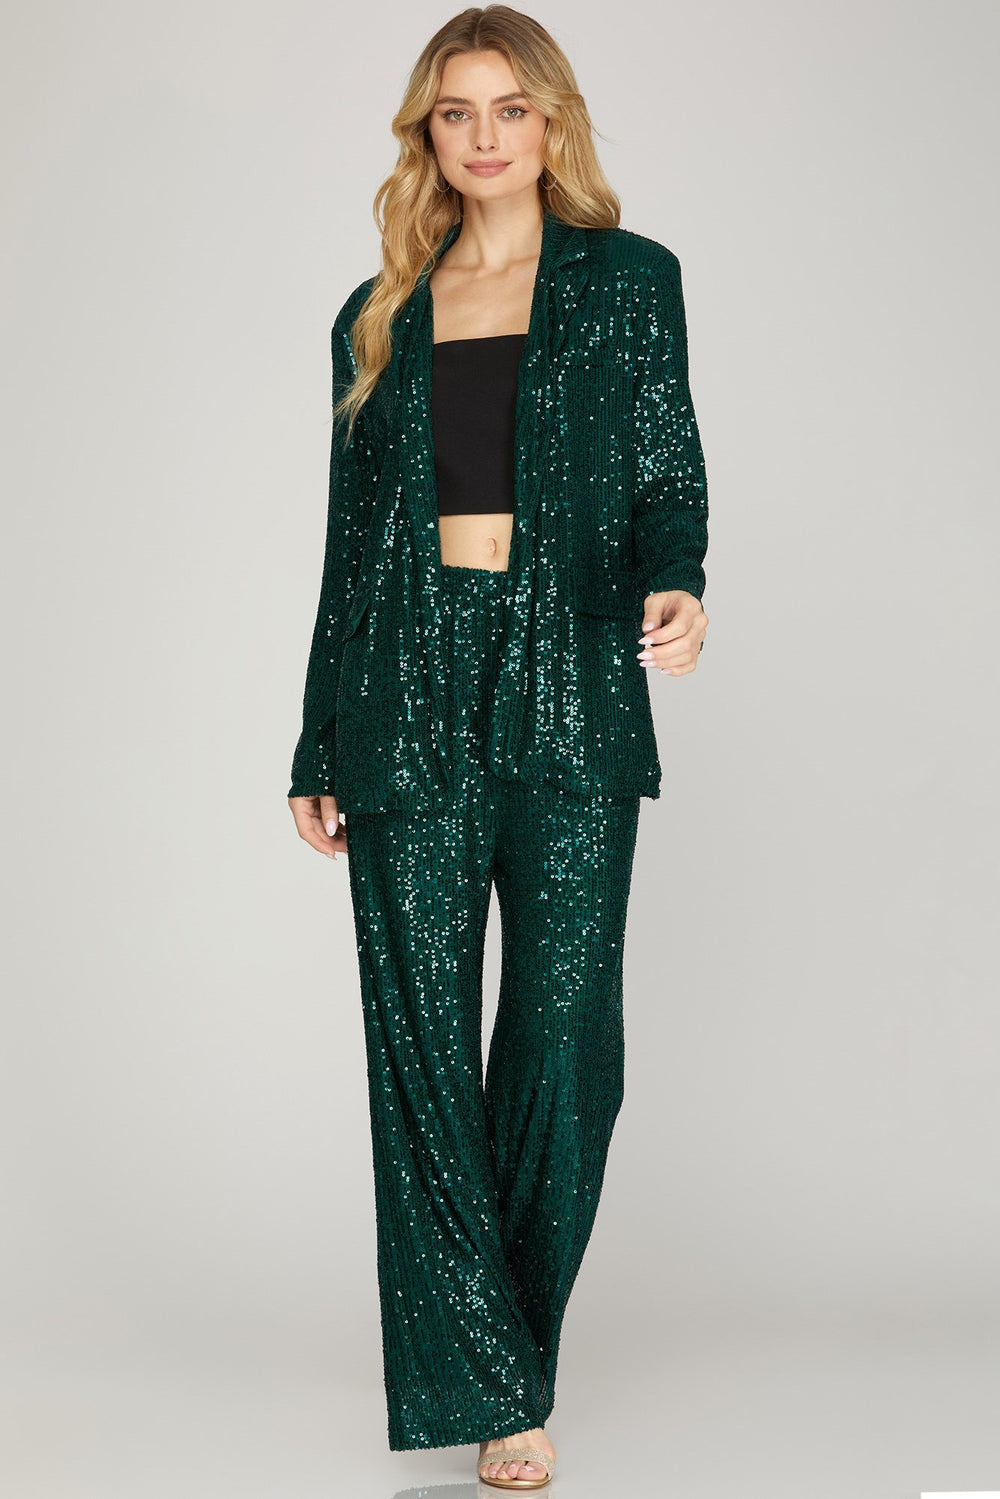 Jasmine Single Button Sequin Blazer, Sea Green-Outerwear-Inspired by Justeen-Women's Clothing Boutique in Chicago, Illinois